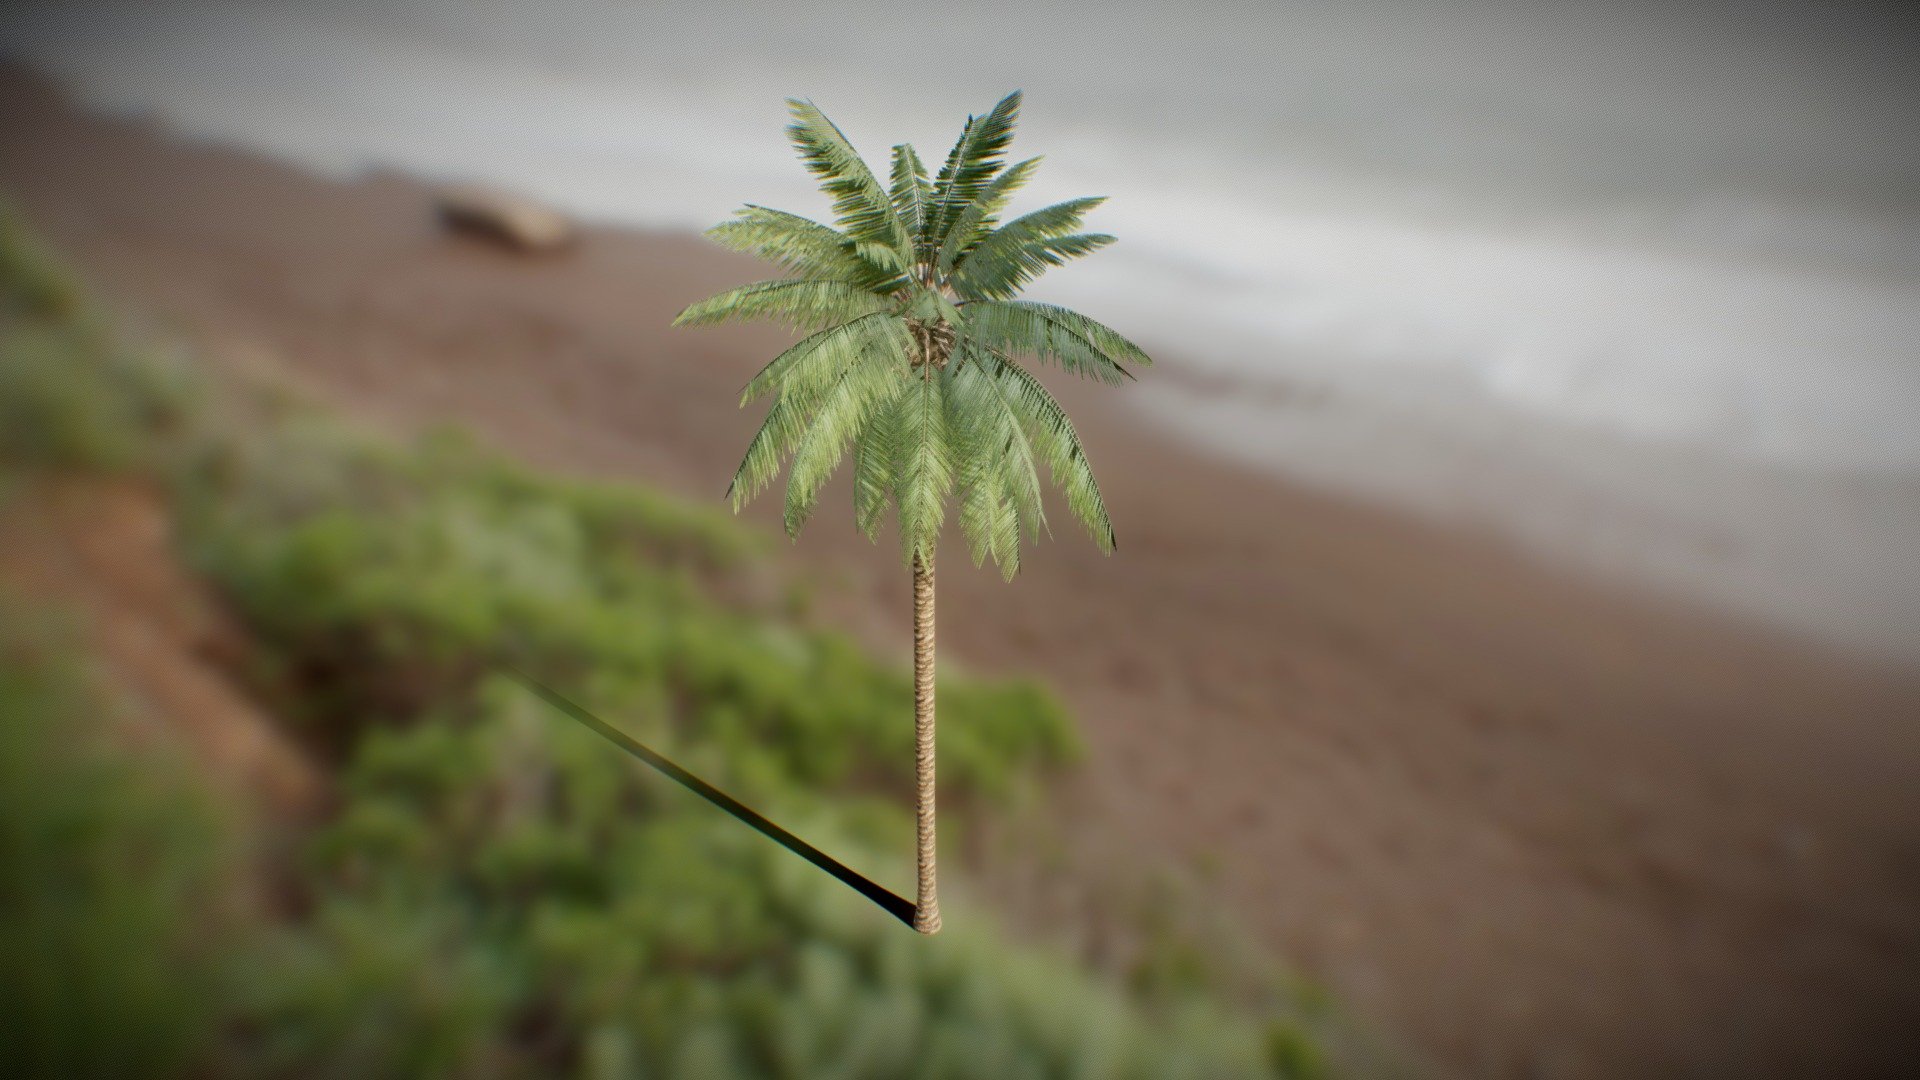 A set of optimized and realistic palm 3d models from unity, unreal engine or others
Buy from asset store for unity:
Asset Name: Palm Tree Pack 2022

 - Realistic Palm Tree Model vol.1 - Download Free 3D model by aliyeredon 3d model